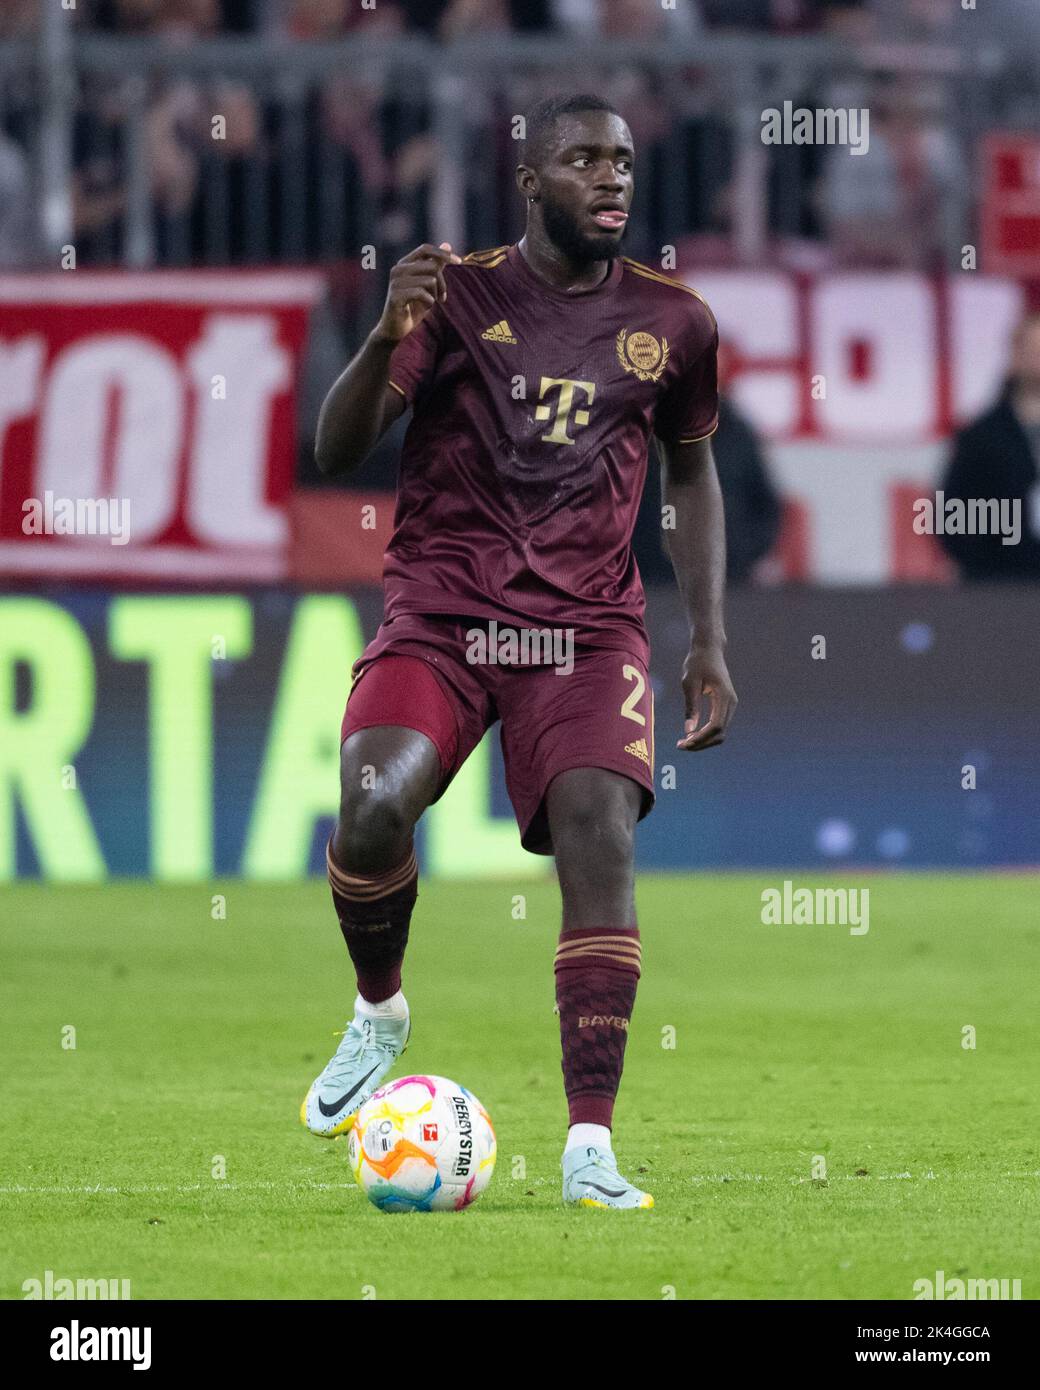 Munich, Germany. 30th Sep, 2022. Soccer: Bundesliga, Bayern Munich - Bayer Leverkusen, matchday 8 at Allianz Arena. Dayot Upamecano from Munich plays the ball. Credit: Sven Hoppe/dpa - IMPORTANT NOTE: In accordance with the requirements of the DFL Deutsche Fußball Liga and the DFB Deutscher Fußball-Bund, it is prohibited to use or have used photographs taken in the stadium and/or of the match in the form of sequence pictures and/or video-like photo series./dpa/Alamy Live News Stock Photo